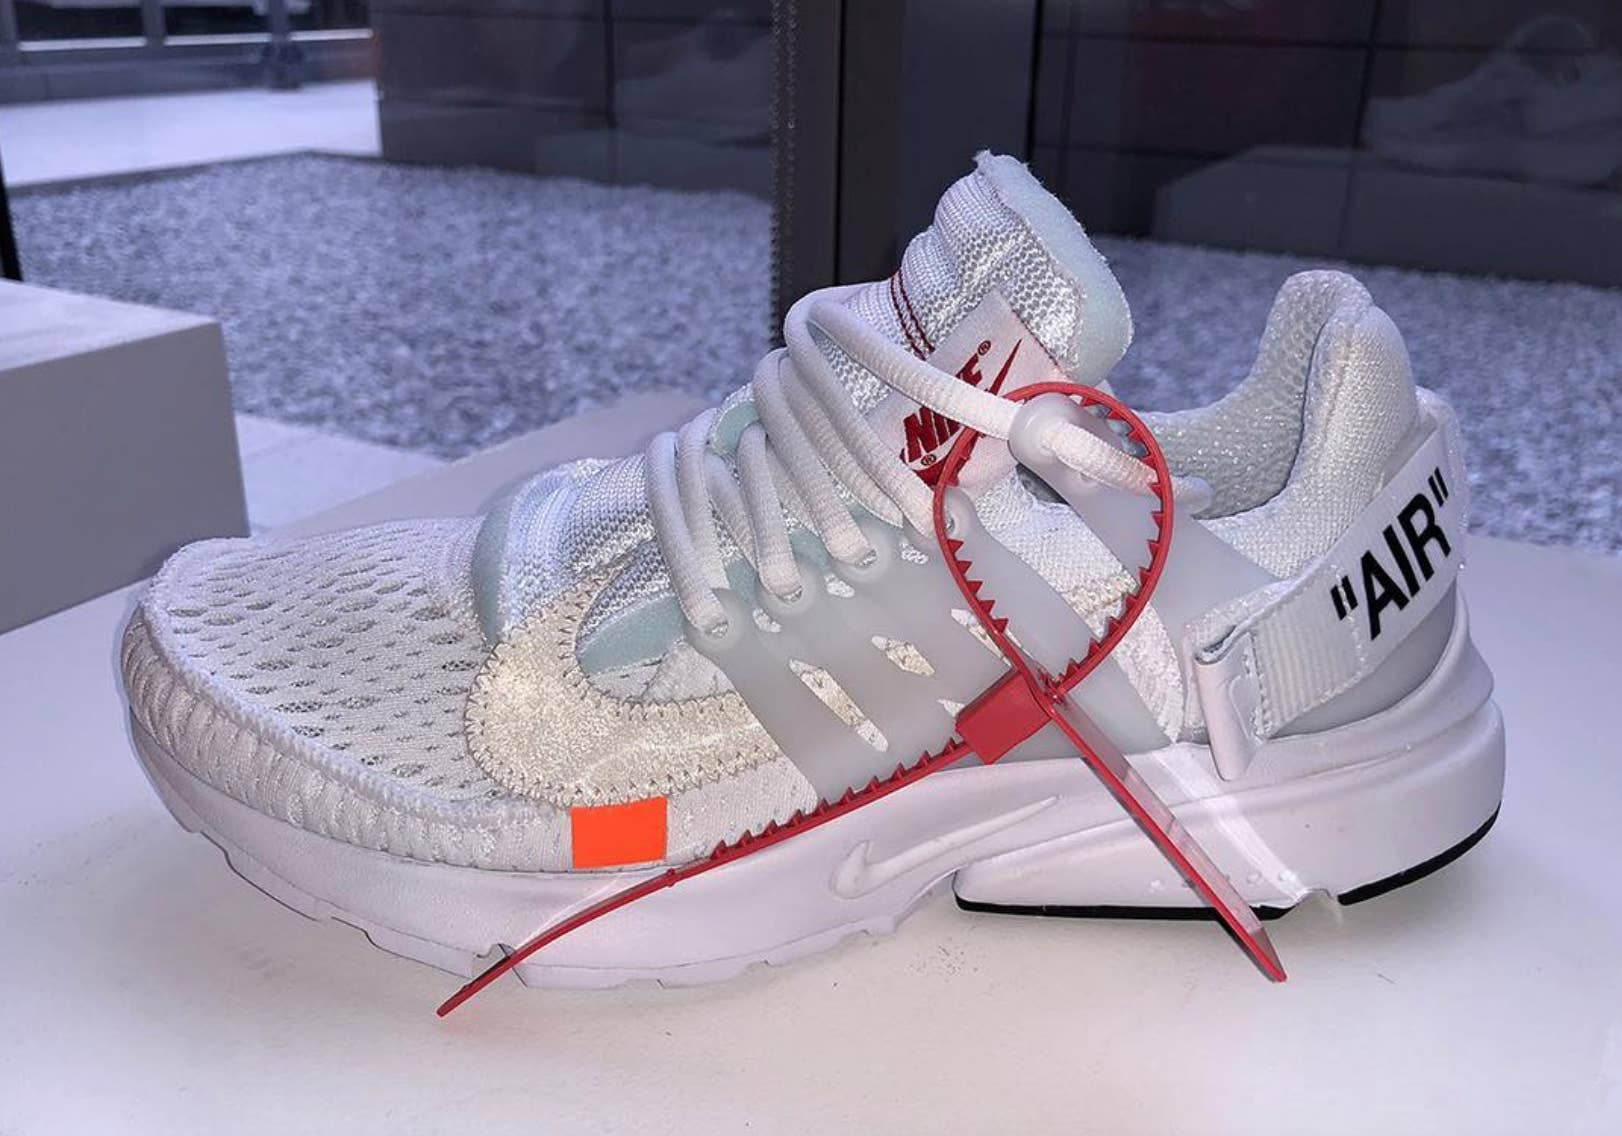 slack animation krølle The Next Off-White x Nike Air Presto Is Coming Soon | Complex